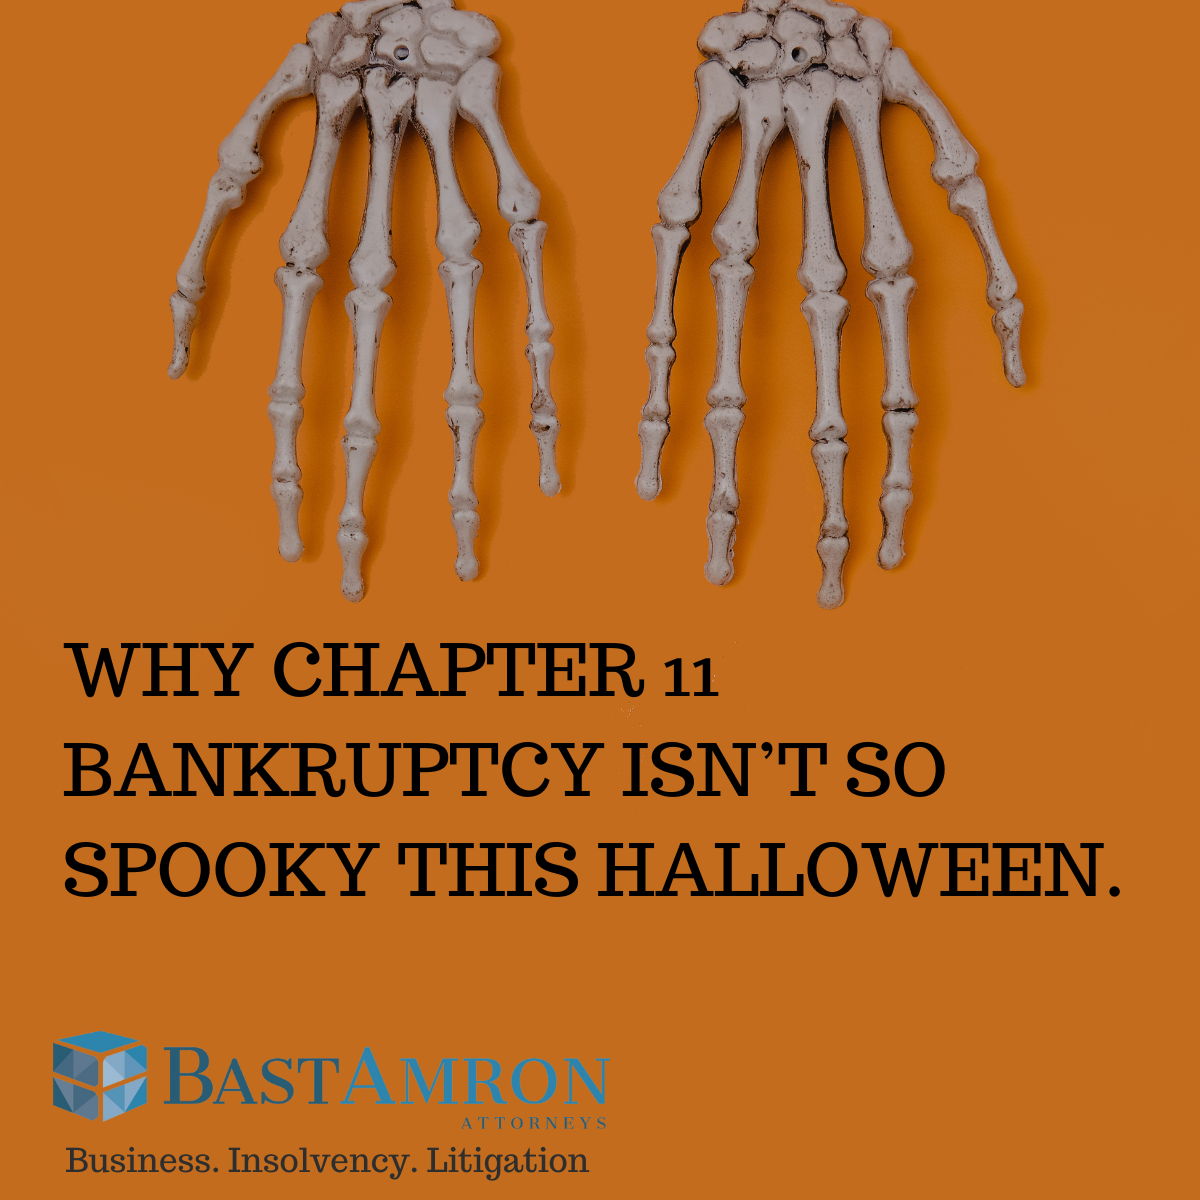 BAST AMRON: WHY CHAPTER 11 BANKRUPTCY ISN’T SO SPOOKY THIS HALLOWEEN